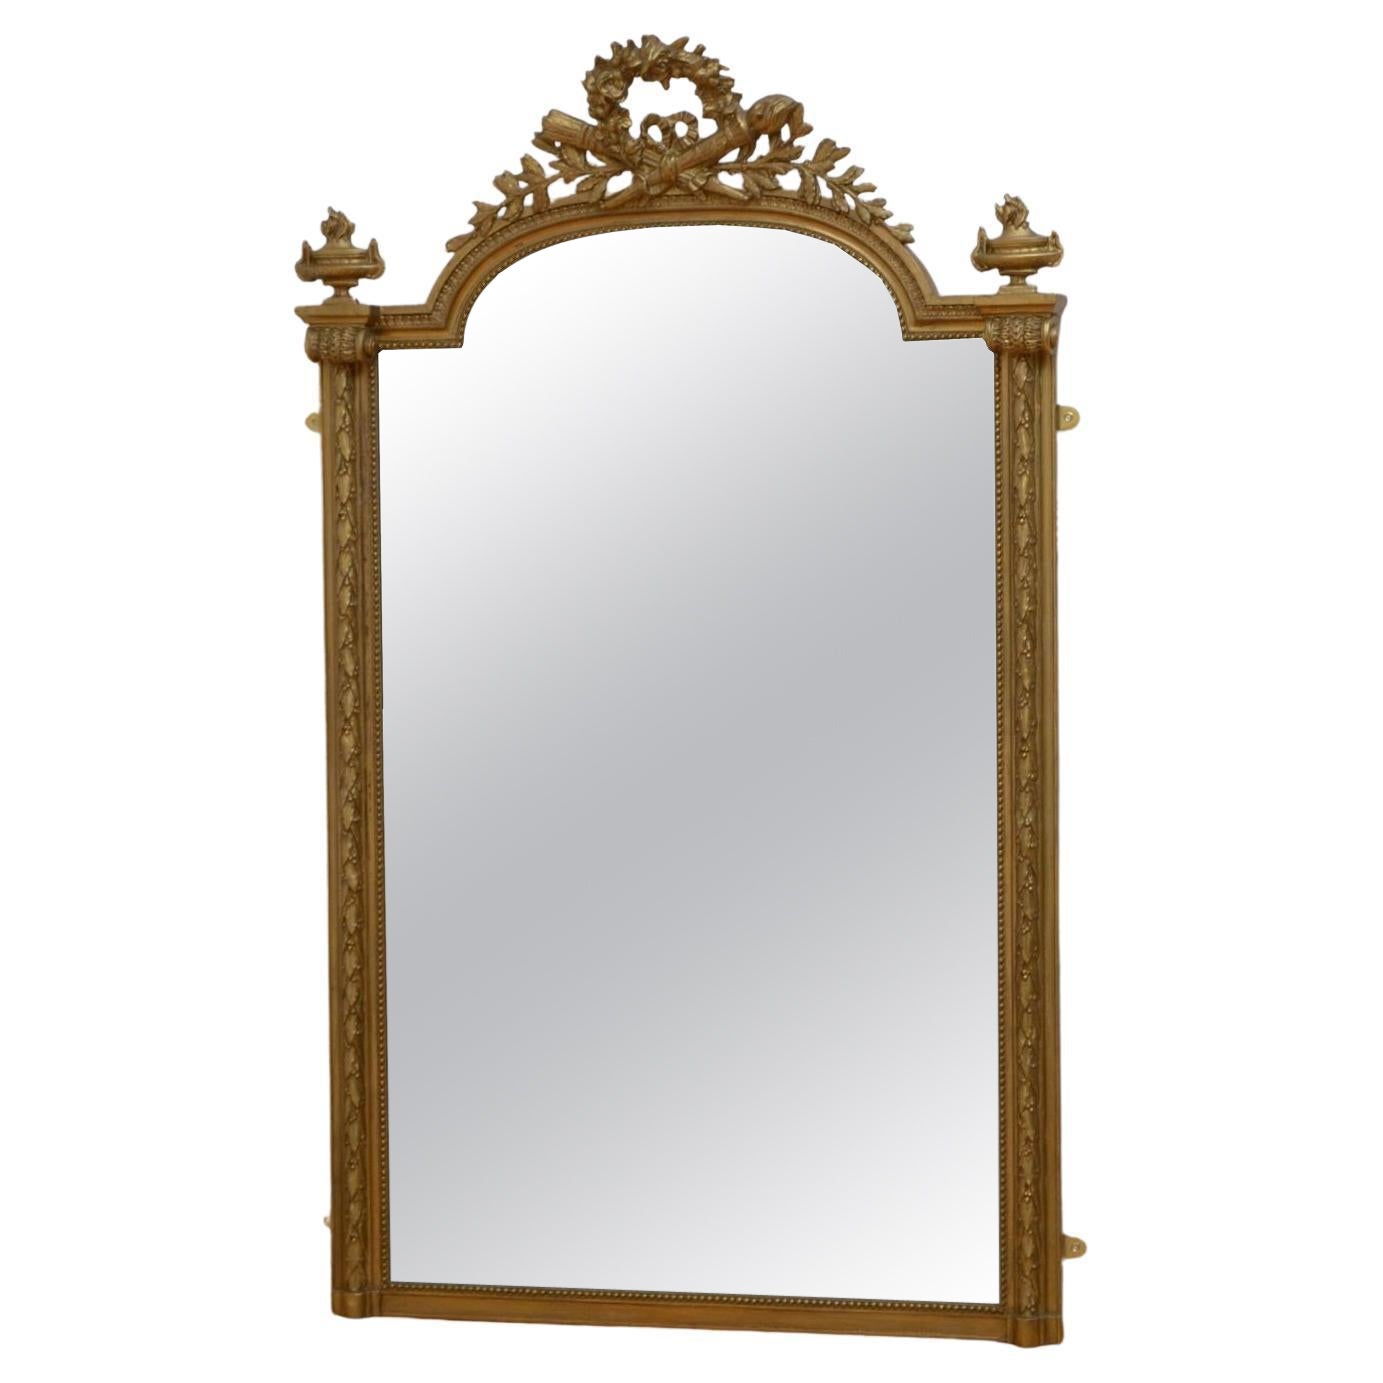 19th Century French Gilded Pier Mirror